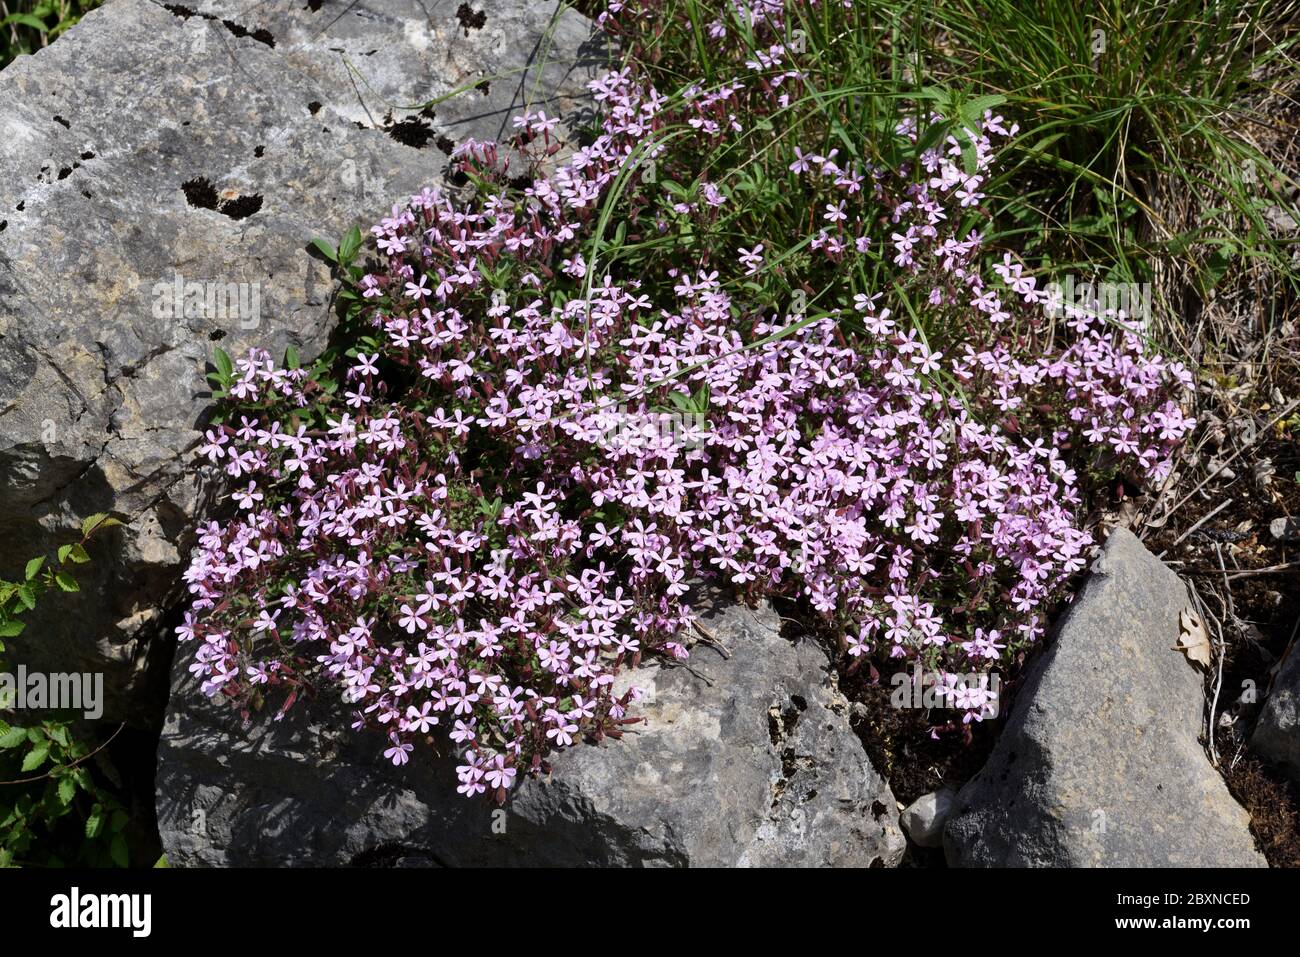 Clump of Rock Soapwort, Saponaria ocymoides, aka Tumbling Ted Growing on Rocks in Provence France Stock Photo